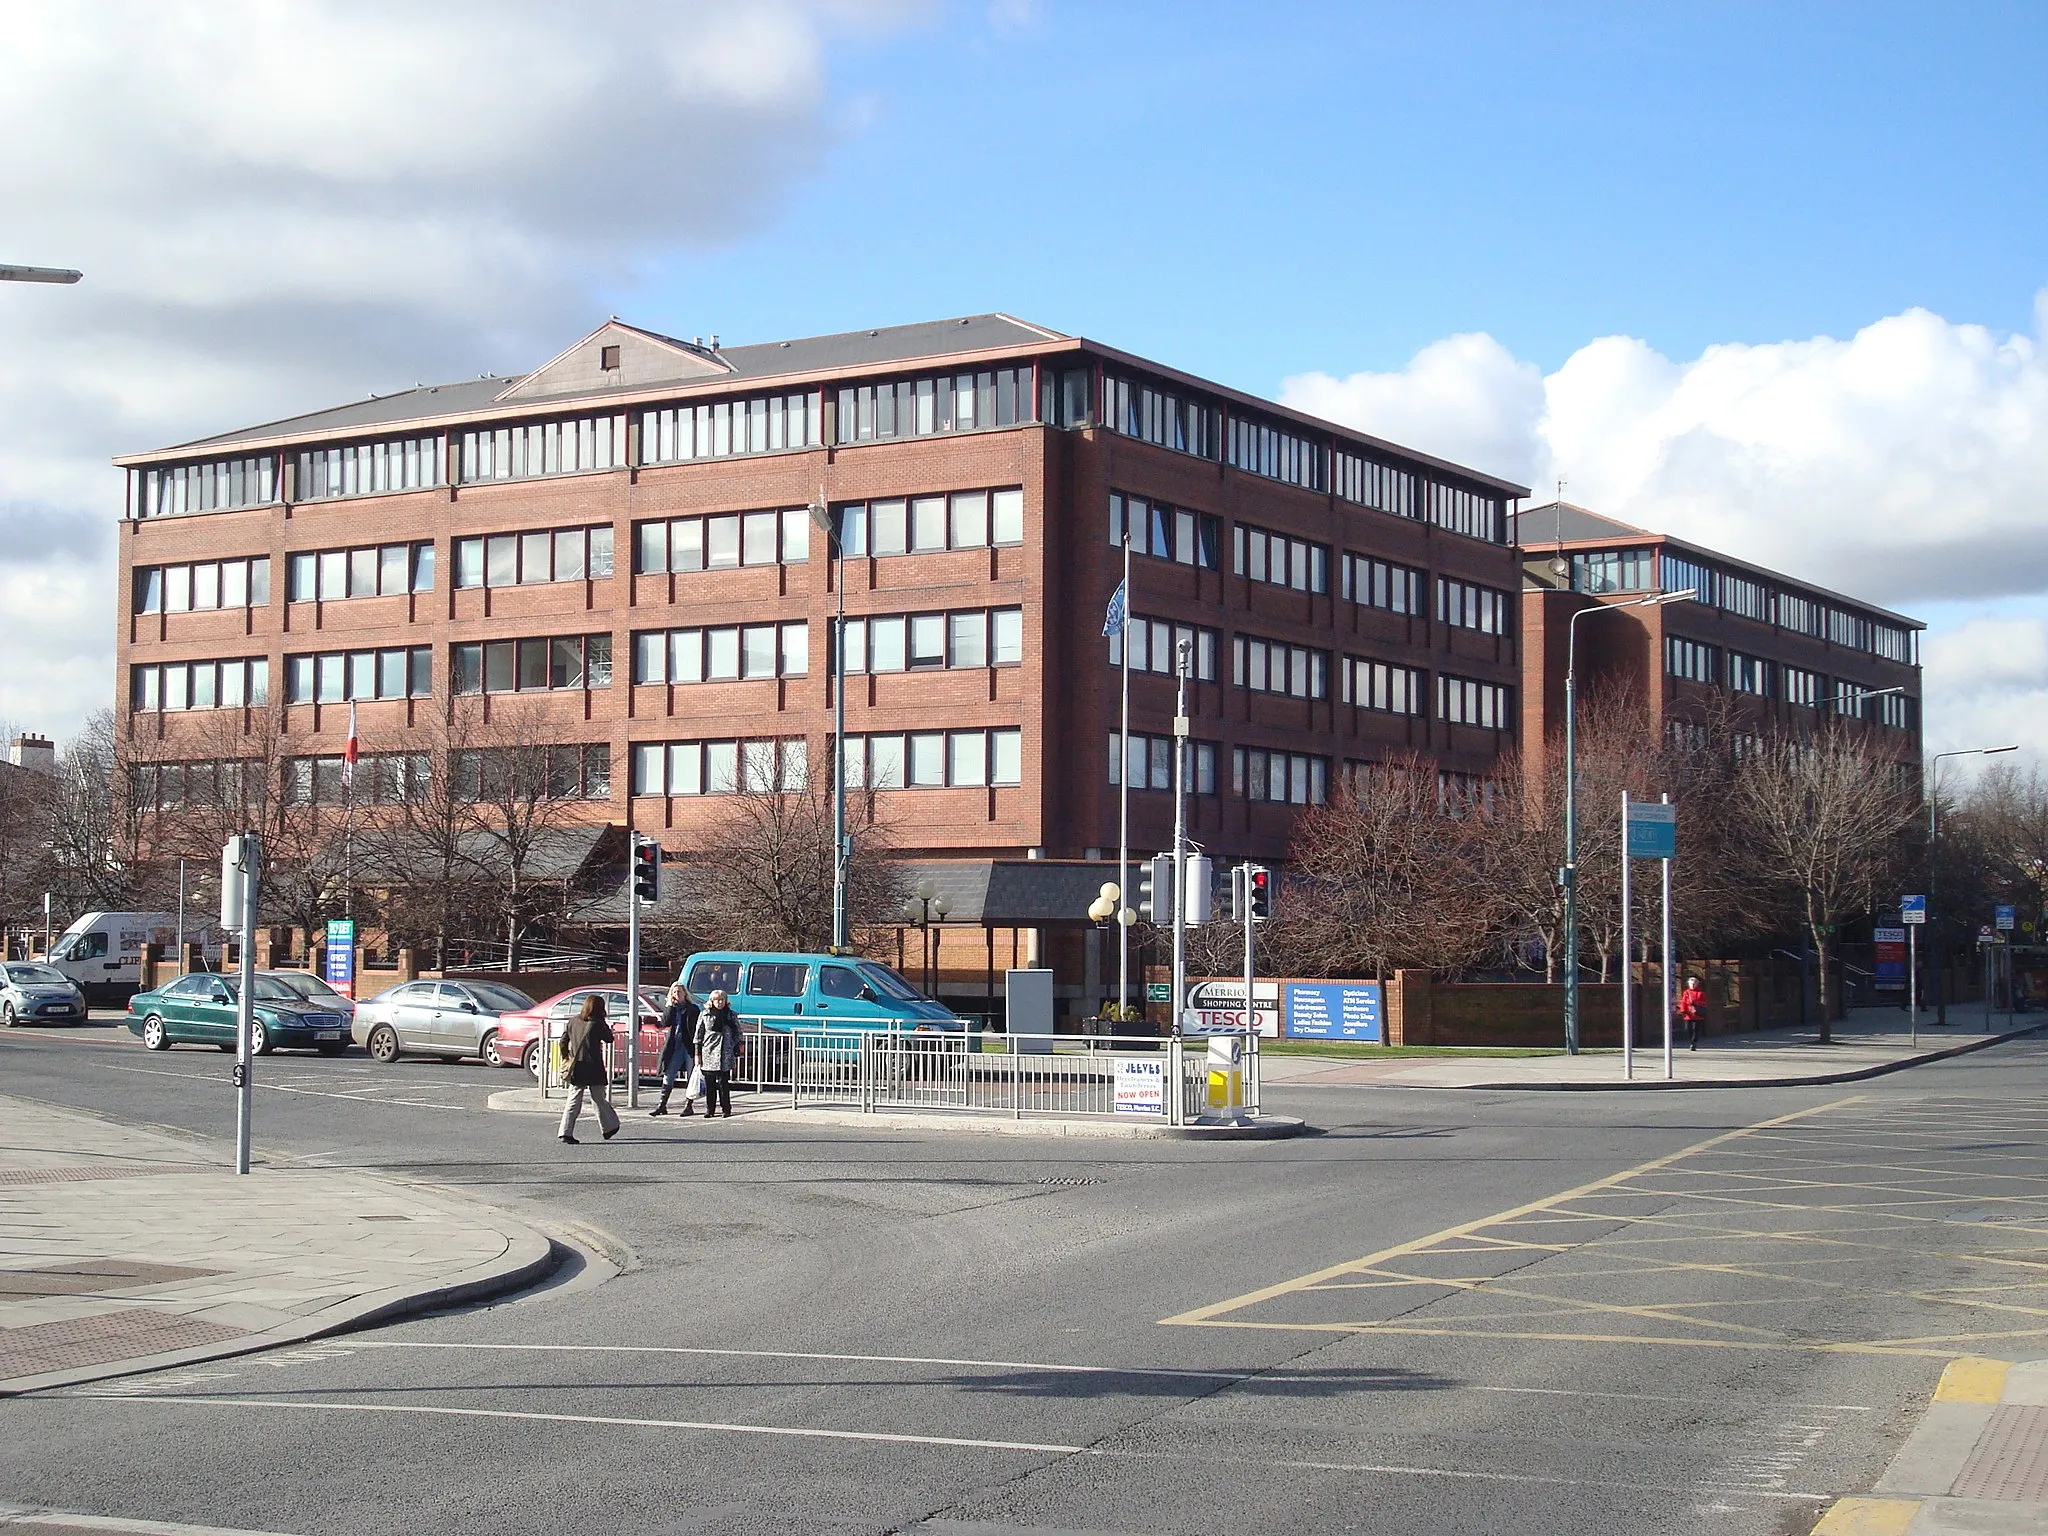 Photo showing: The Merrion Centre which contains a shopping centre with Tesco as its anchor tenant. It is also offices where AIG are based. The Embassy of Japan to Ireland is located in the same building.